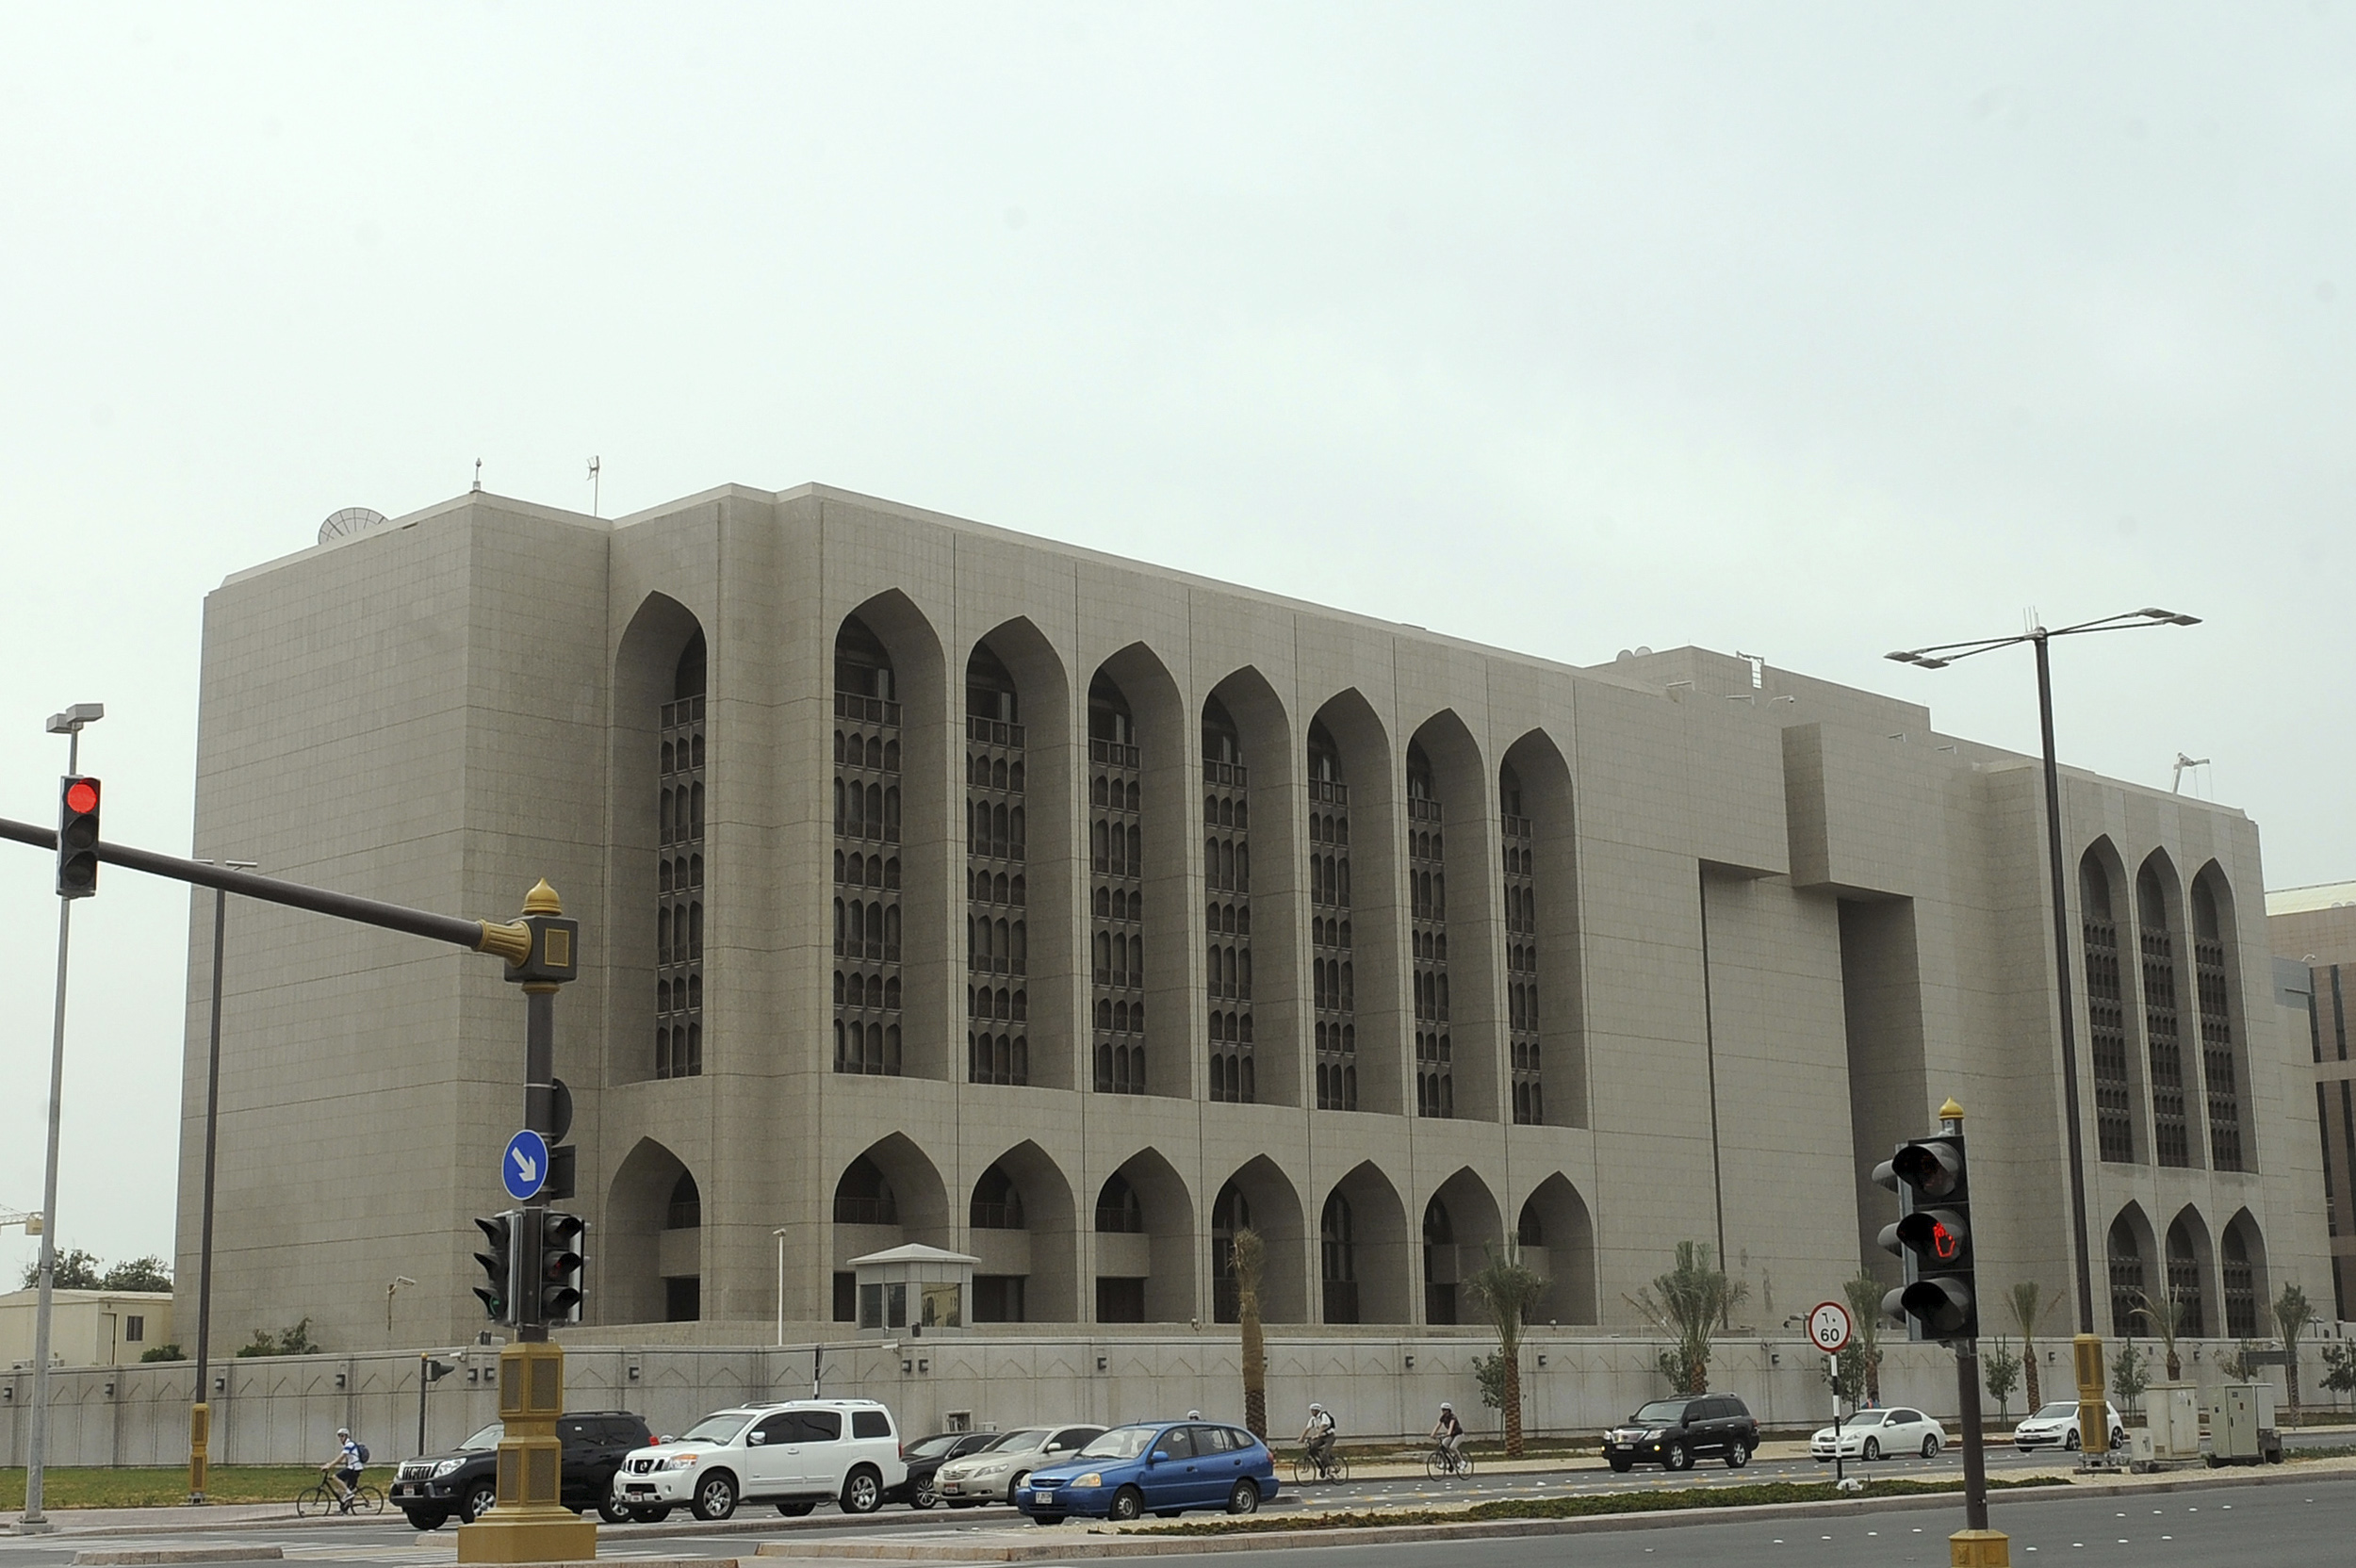 Vehicles stop at a red light in front of the main branch of UAE Central Bank in Abu Dhabi